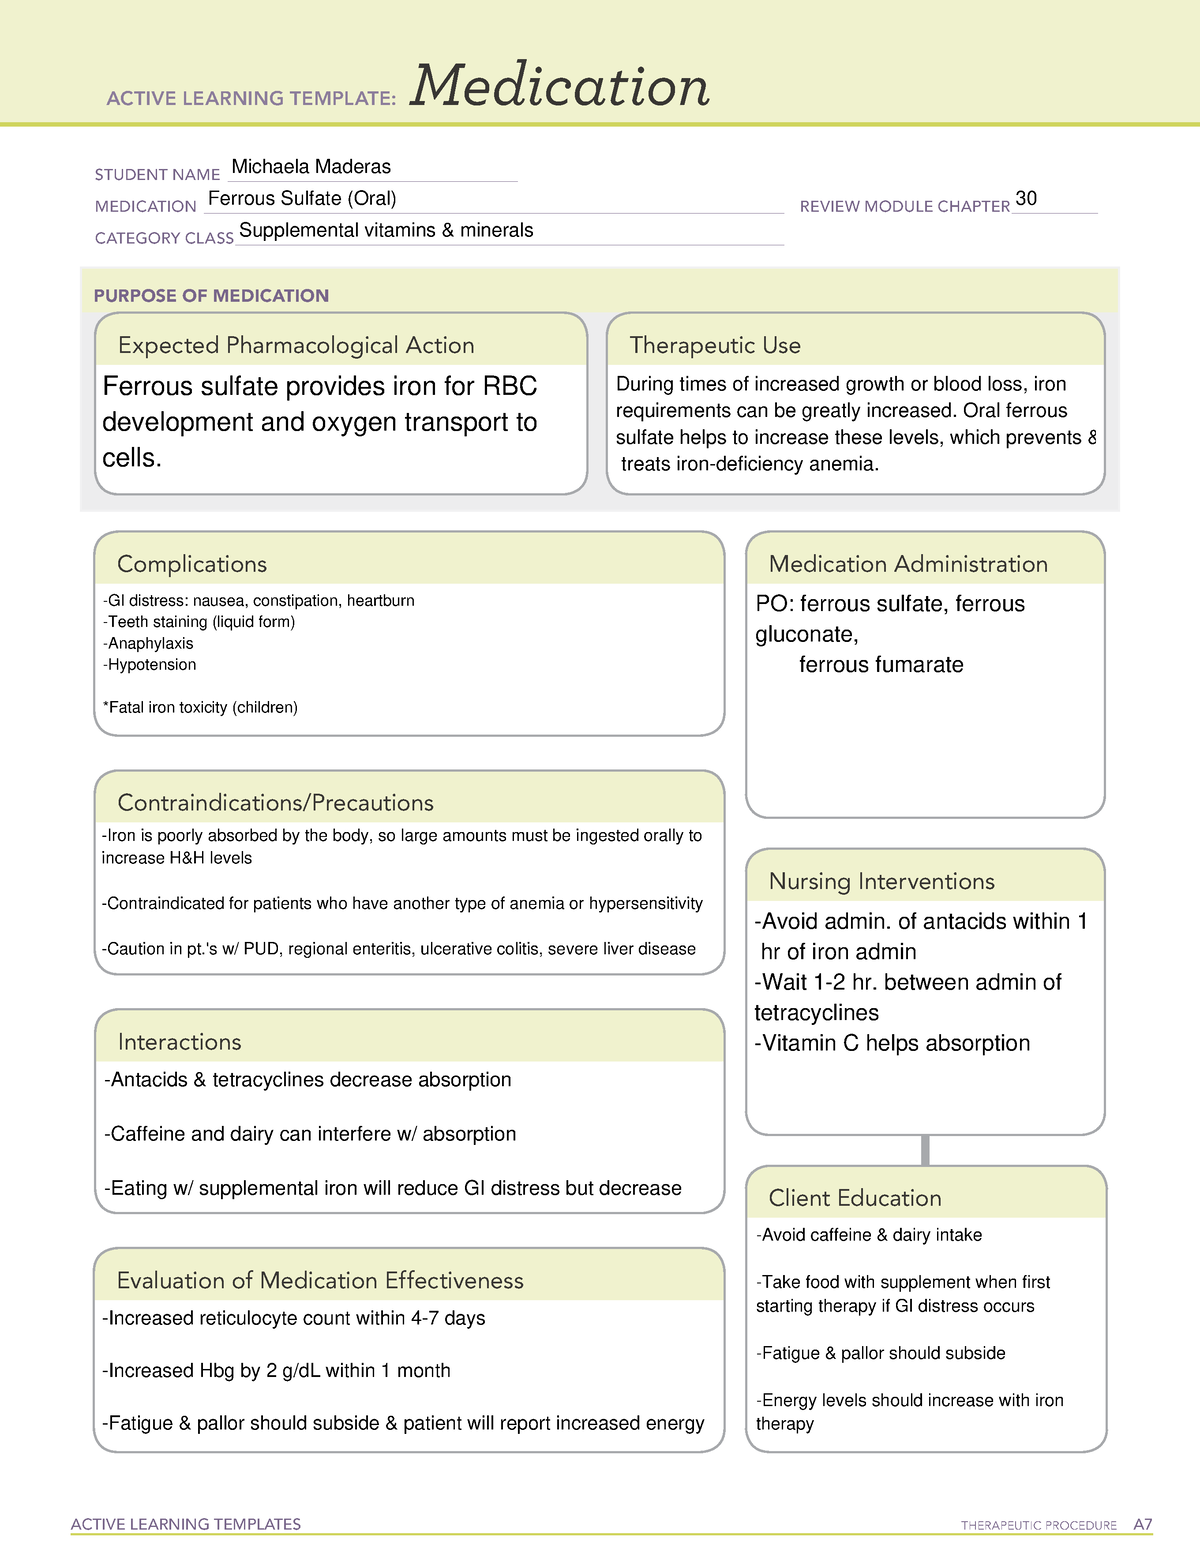 Ferrous sulfate Medication Template ACTIVE LEARNING TEMPLATES